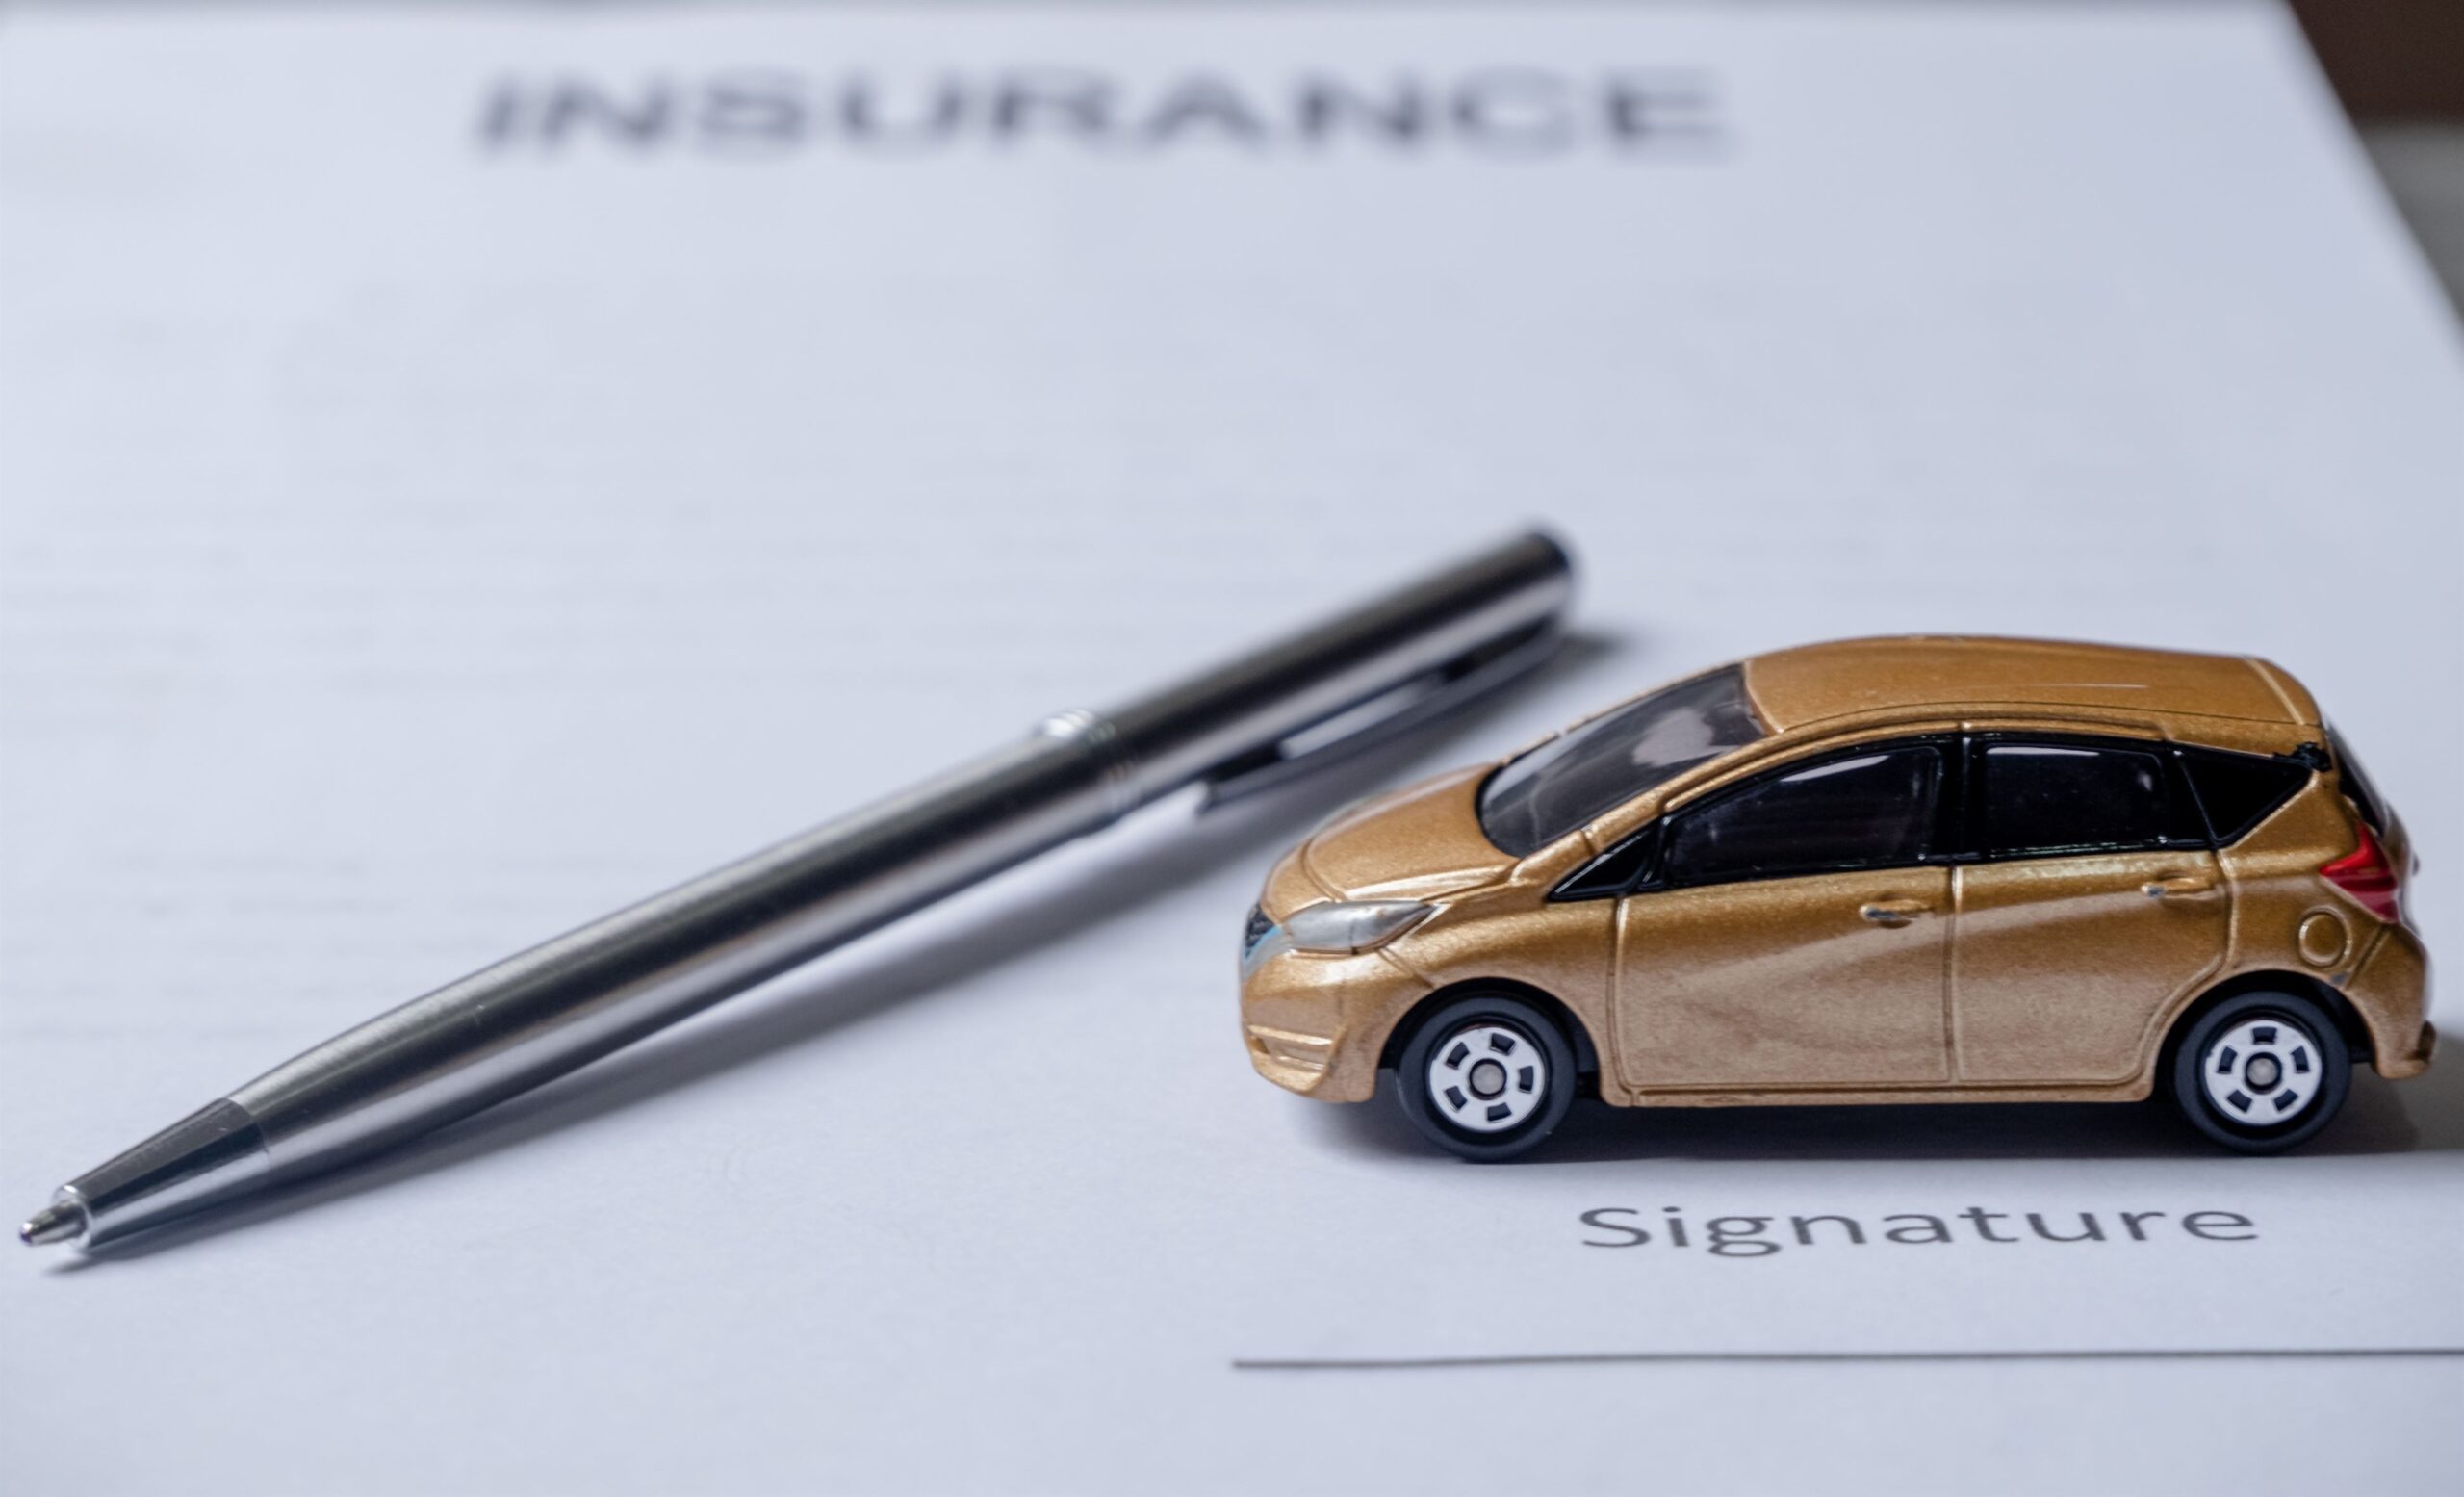 Review Of Otto Insurance (Car Insurance) - Scam Or Legit?